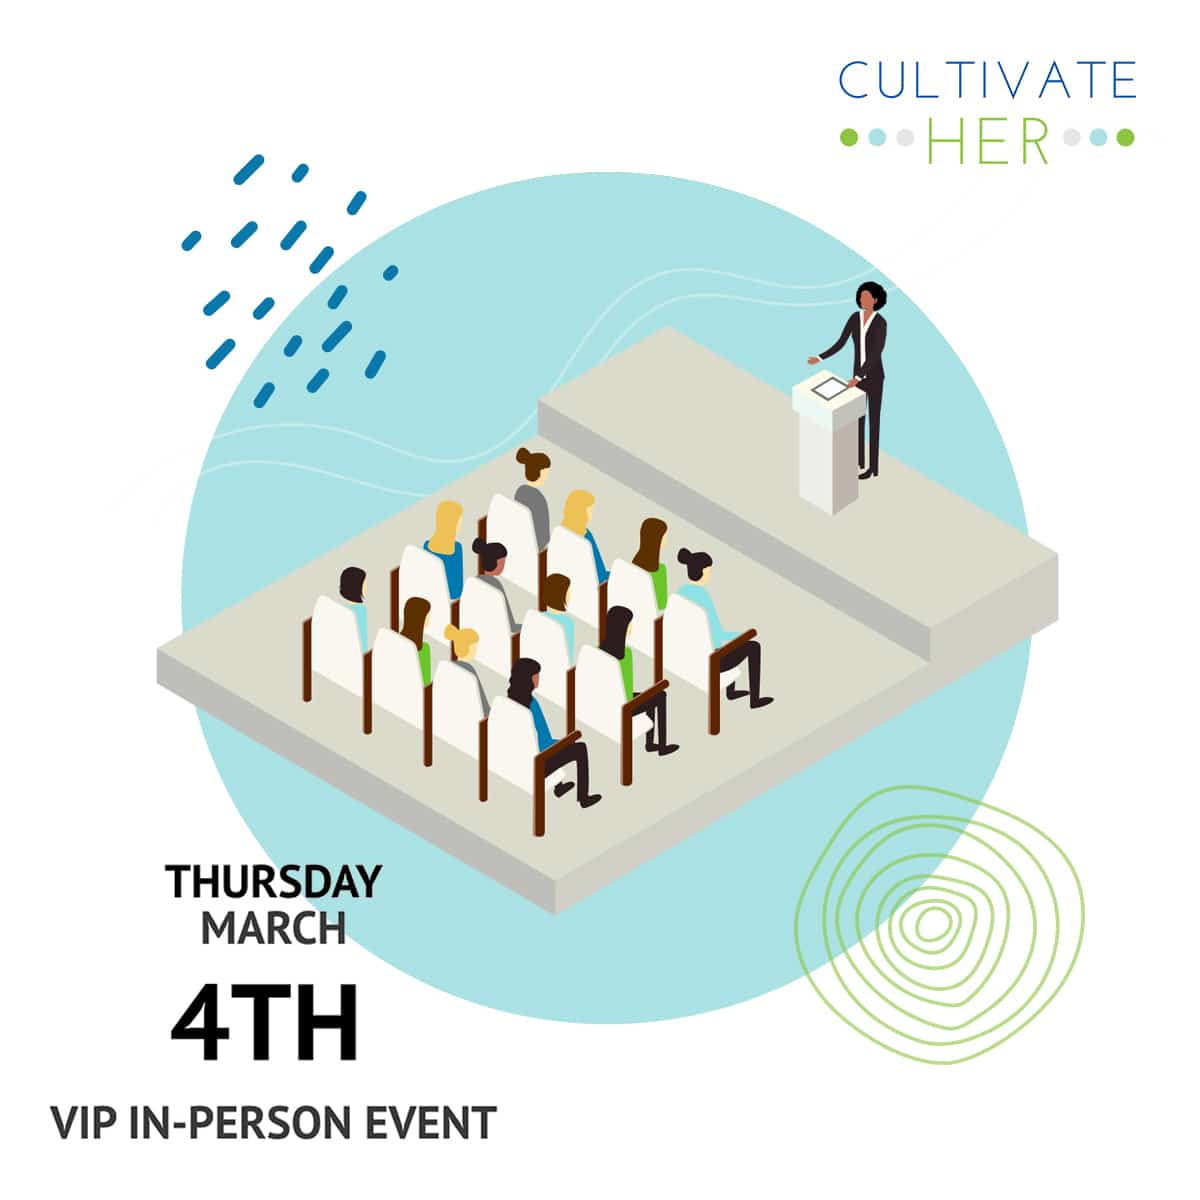 CultivateHer Ticket in-person event